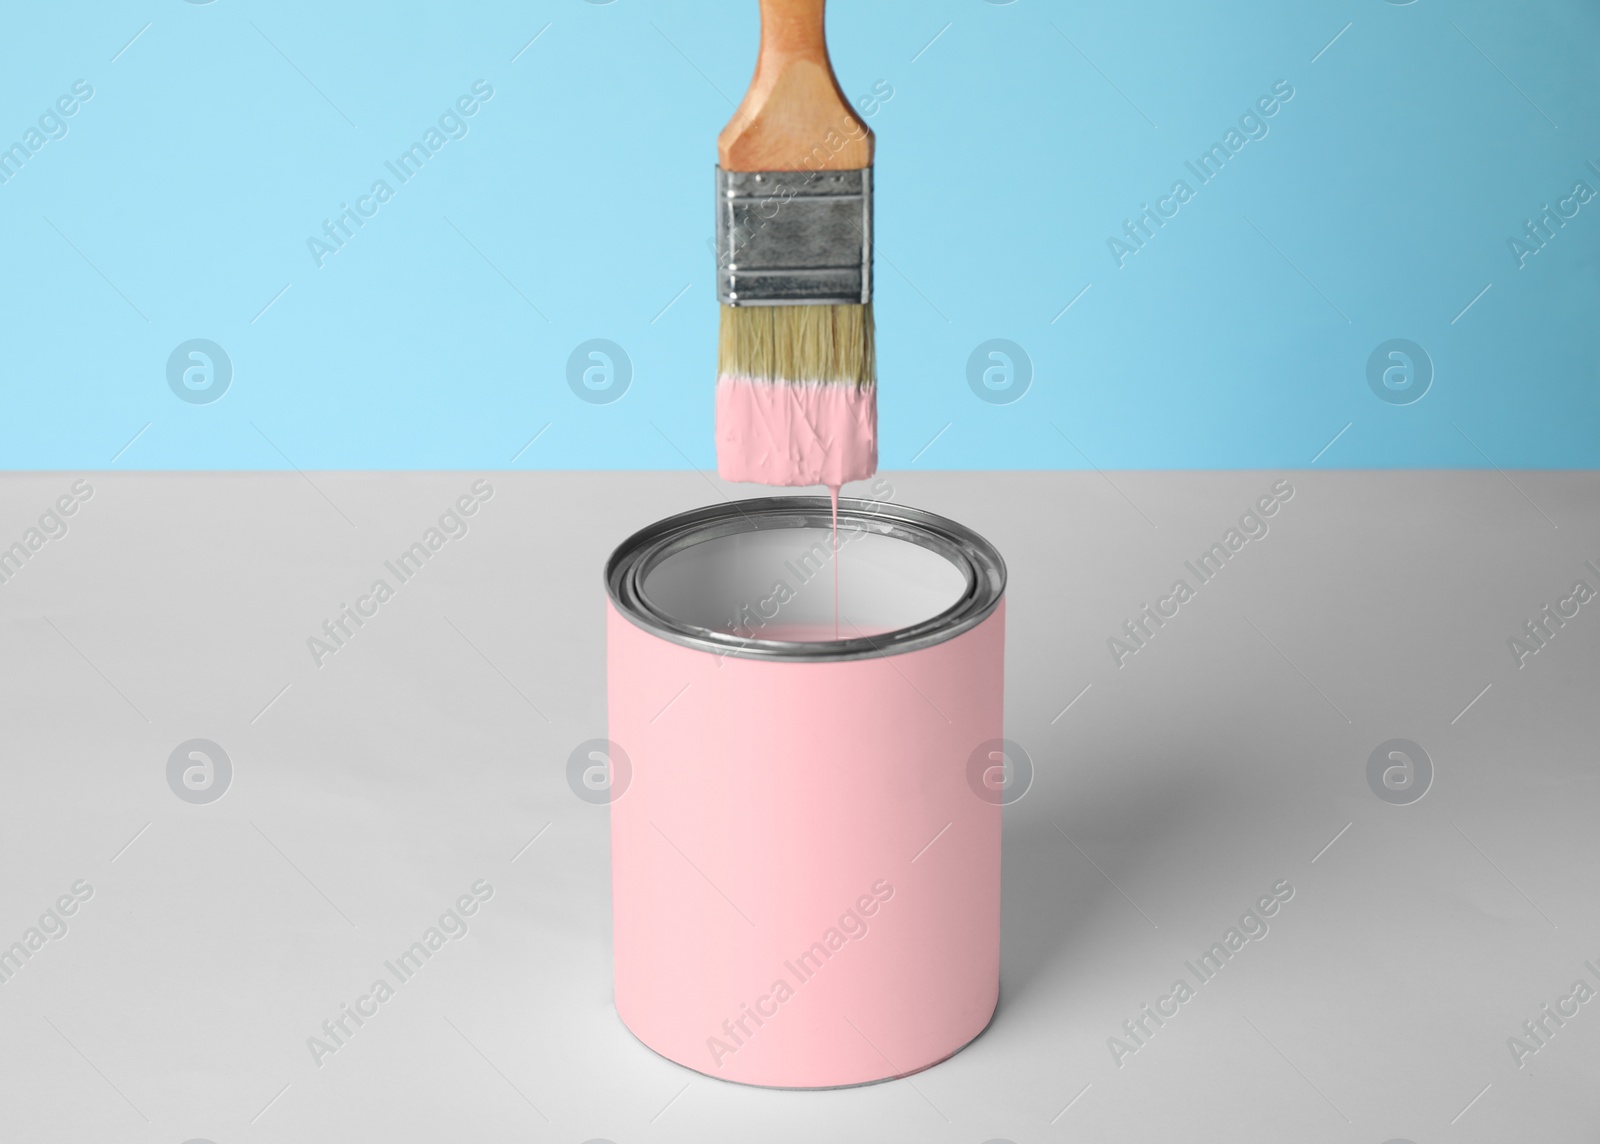 Photo of Brush over can of pink paint on table against blue background